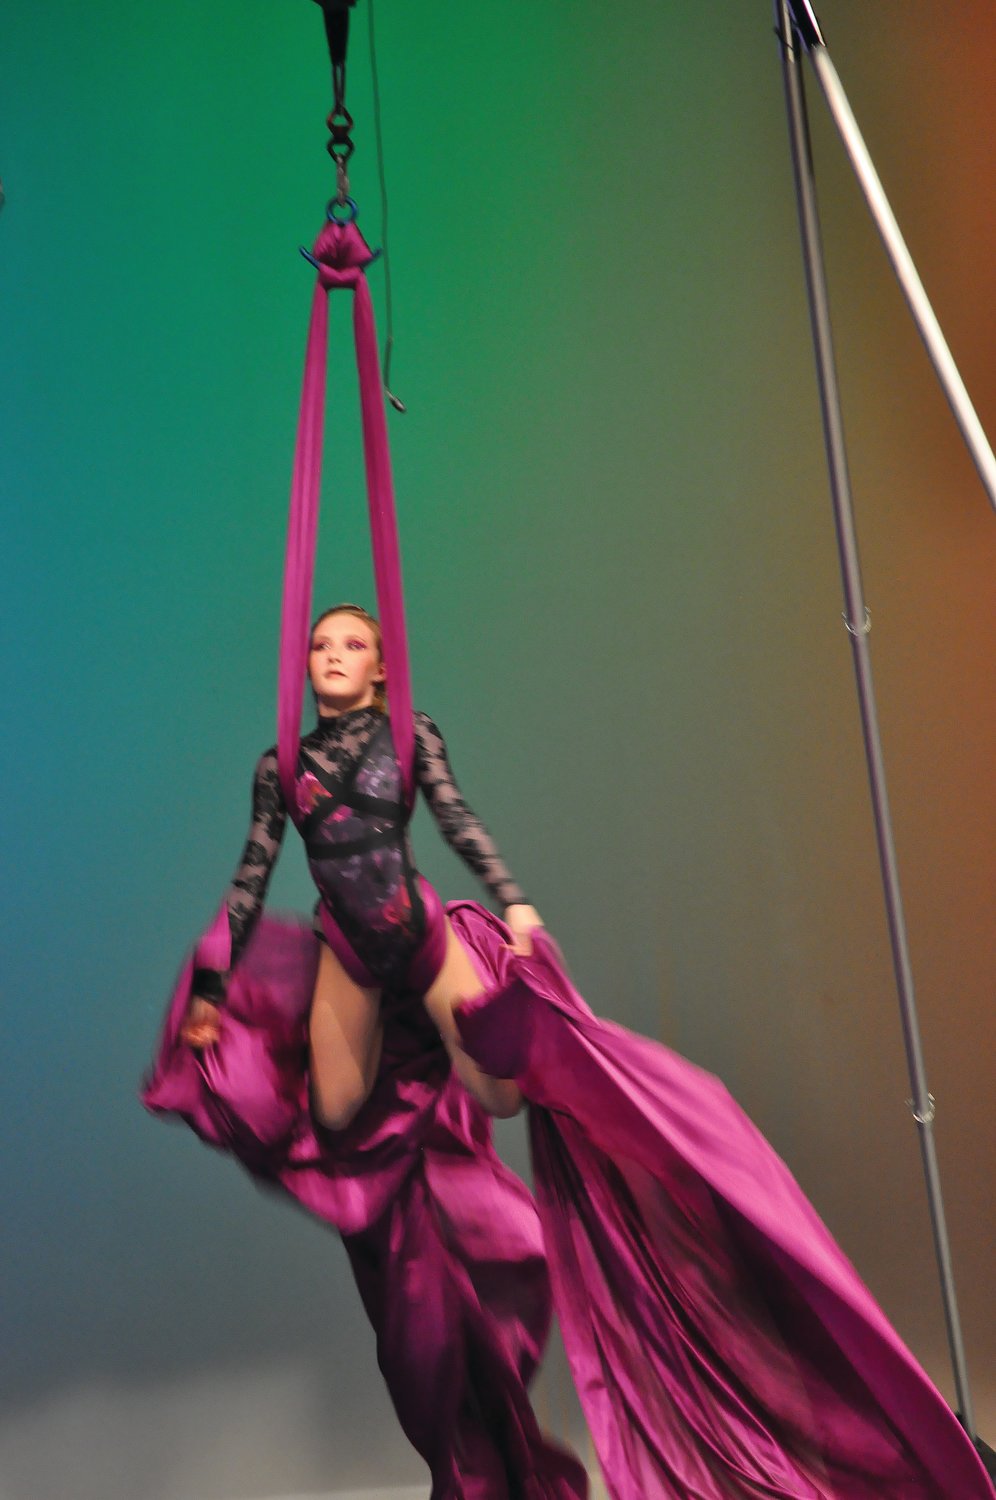 Dericka Jeffers, winner of MoCo's Got Talent for Scholarships, performs an aerial silks routine Saturday at Crawfordsville High School. The competition was a fundraiser for the school's alumni association, which gave $500 scholarships to four Crawfordsville seniors last year.